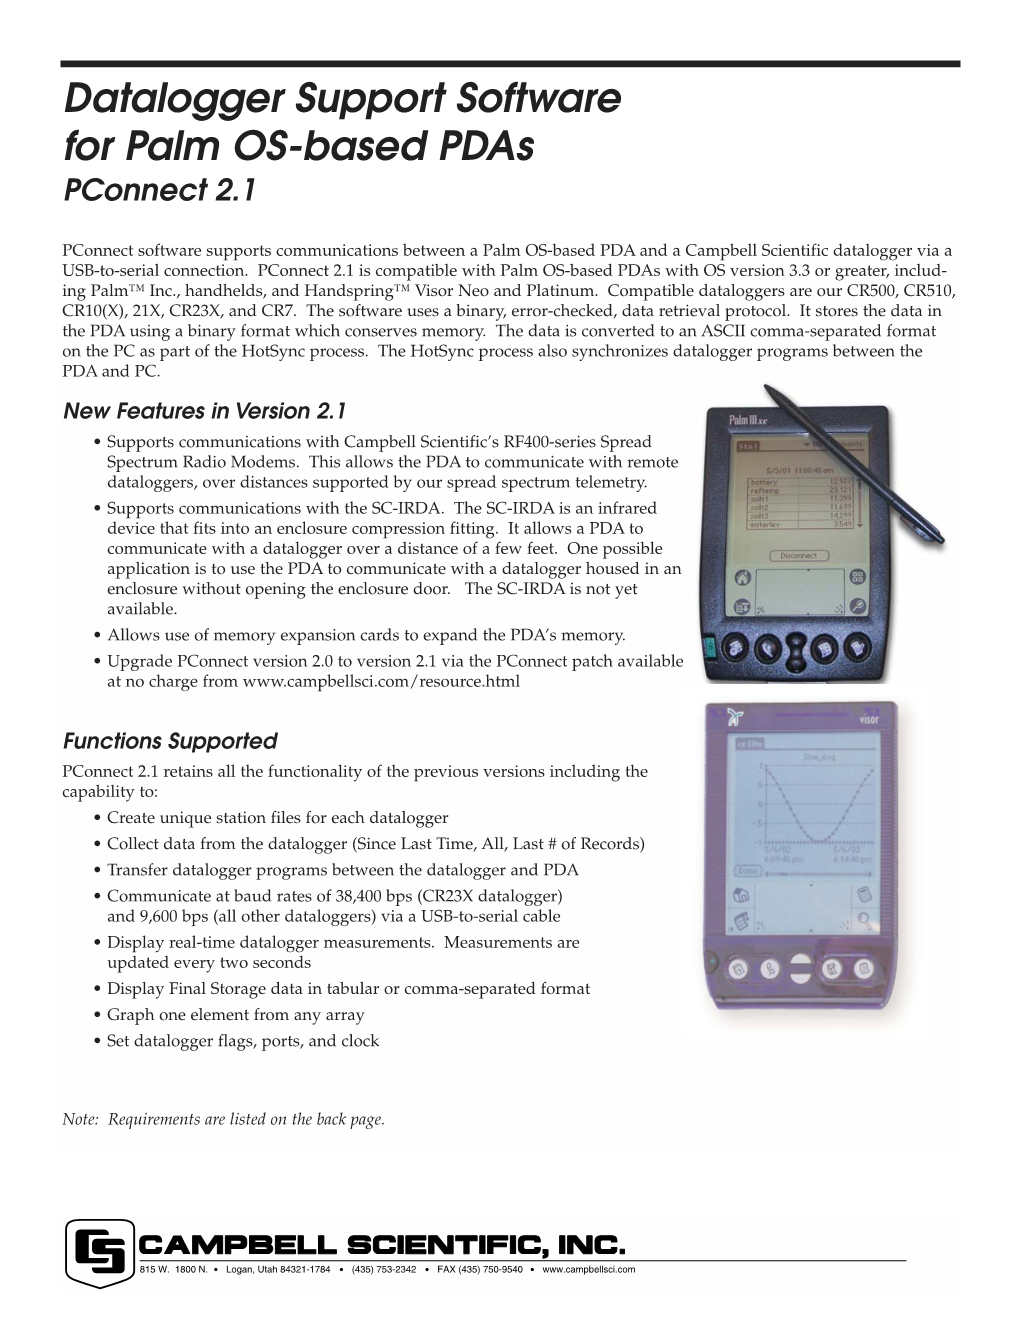 Datalogger Support Software for Palm OS-Based Pdas Pconnect 2.1